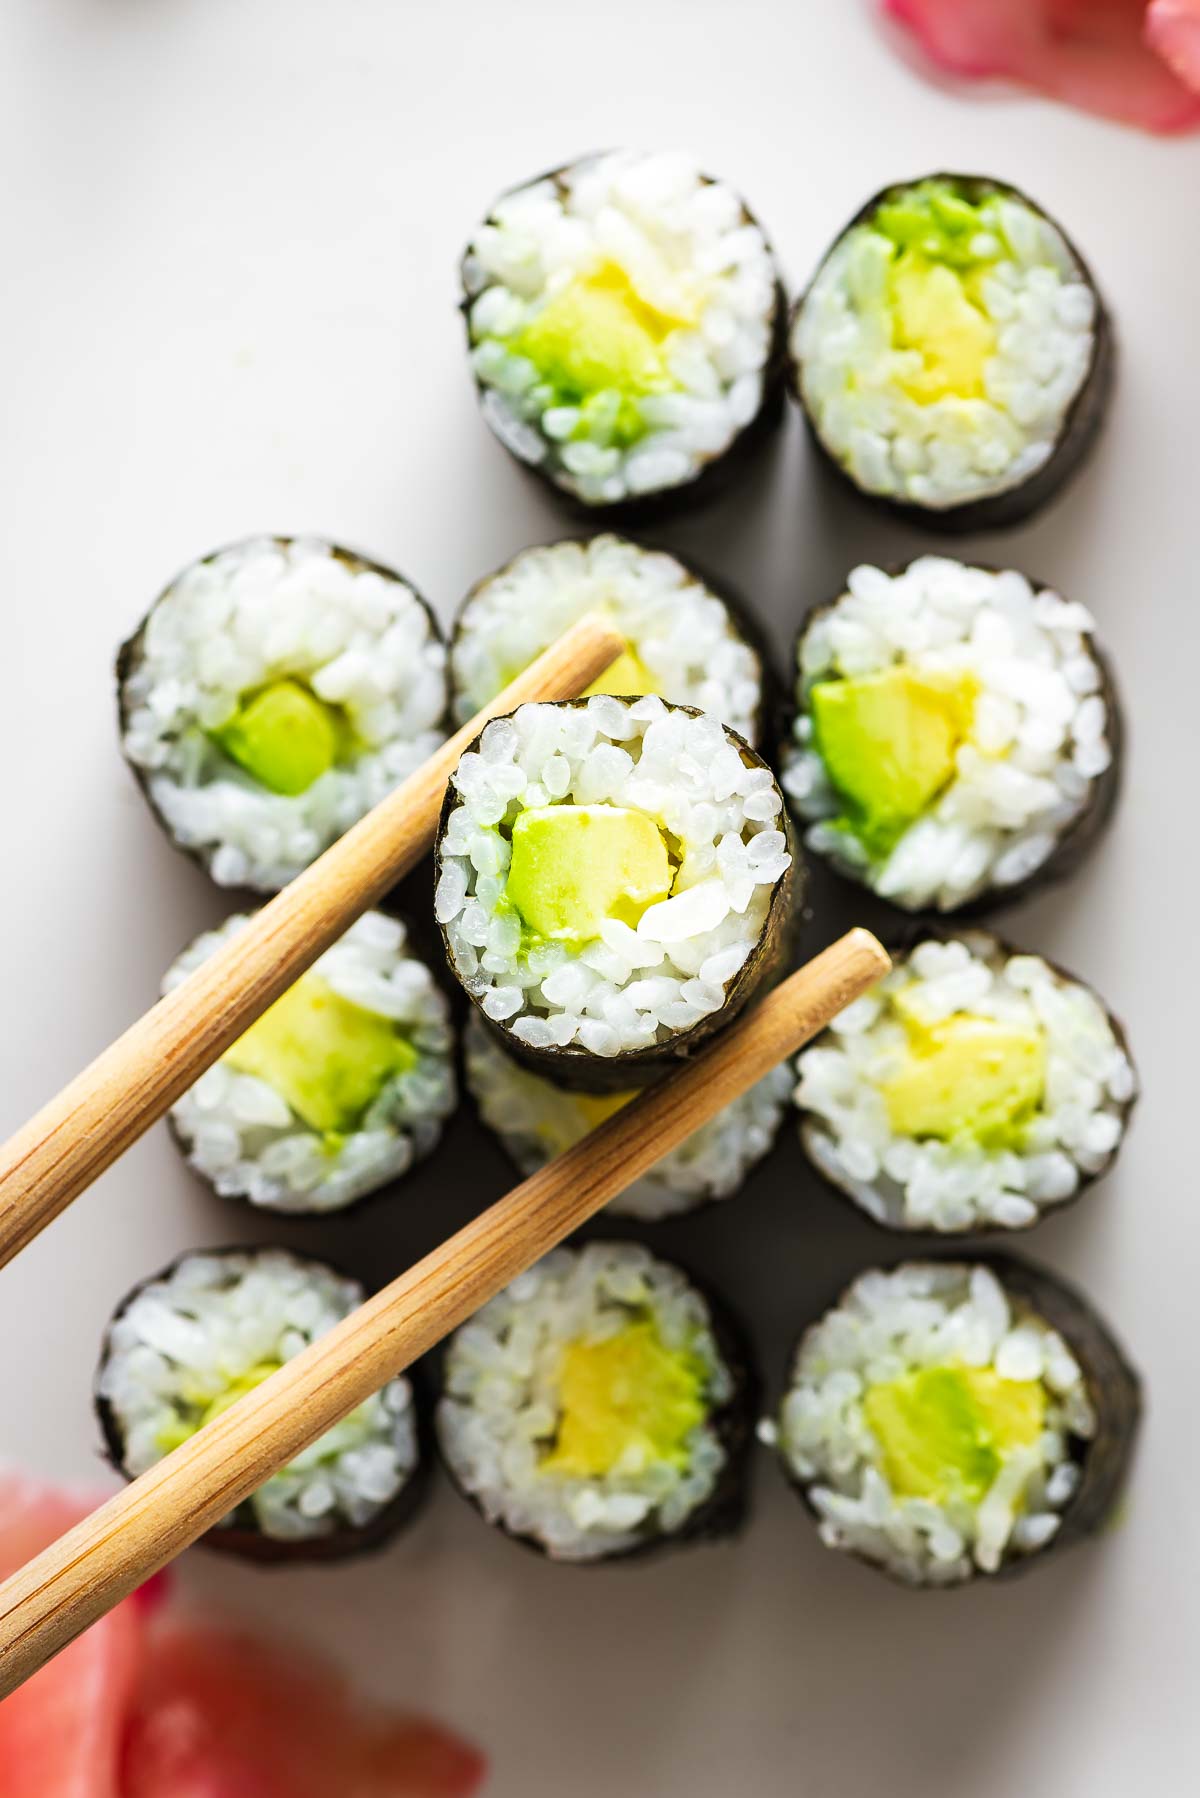 A single avocado sushi roll picked up with chopsticks and more avocado sushi rolls in the background.